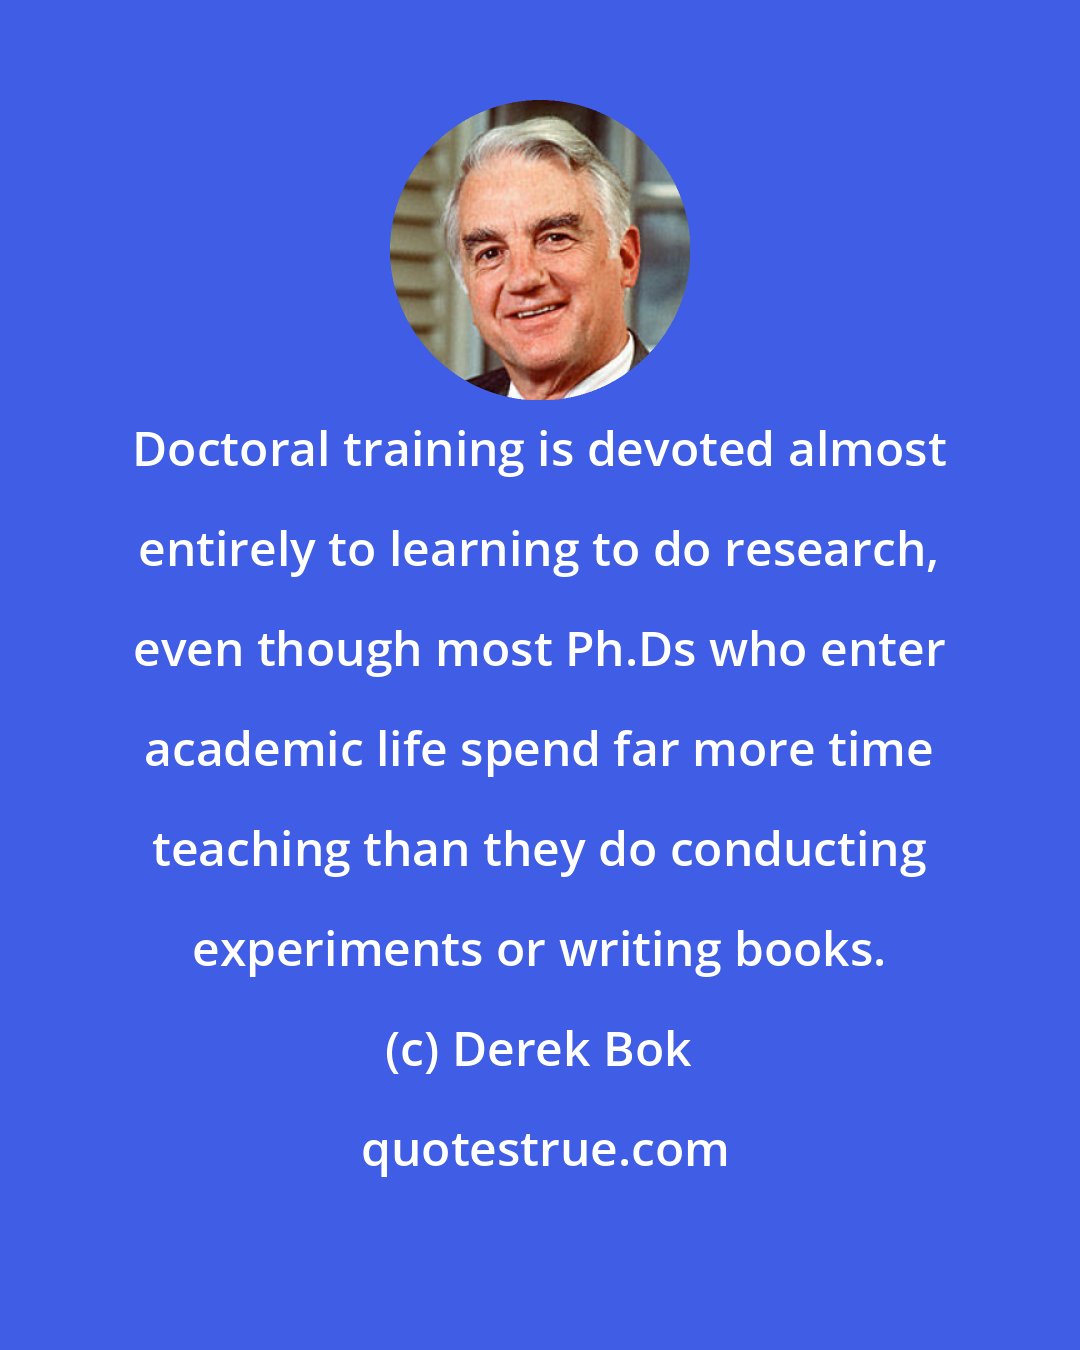 Derek Bok: Doctoral training is devoted almost entirely to learning to do research, even though most Ph.Ds who enter academic life spend far more time teaching than they do conducting experiments or writing books.